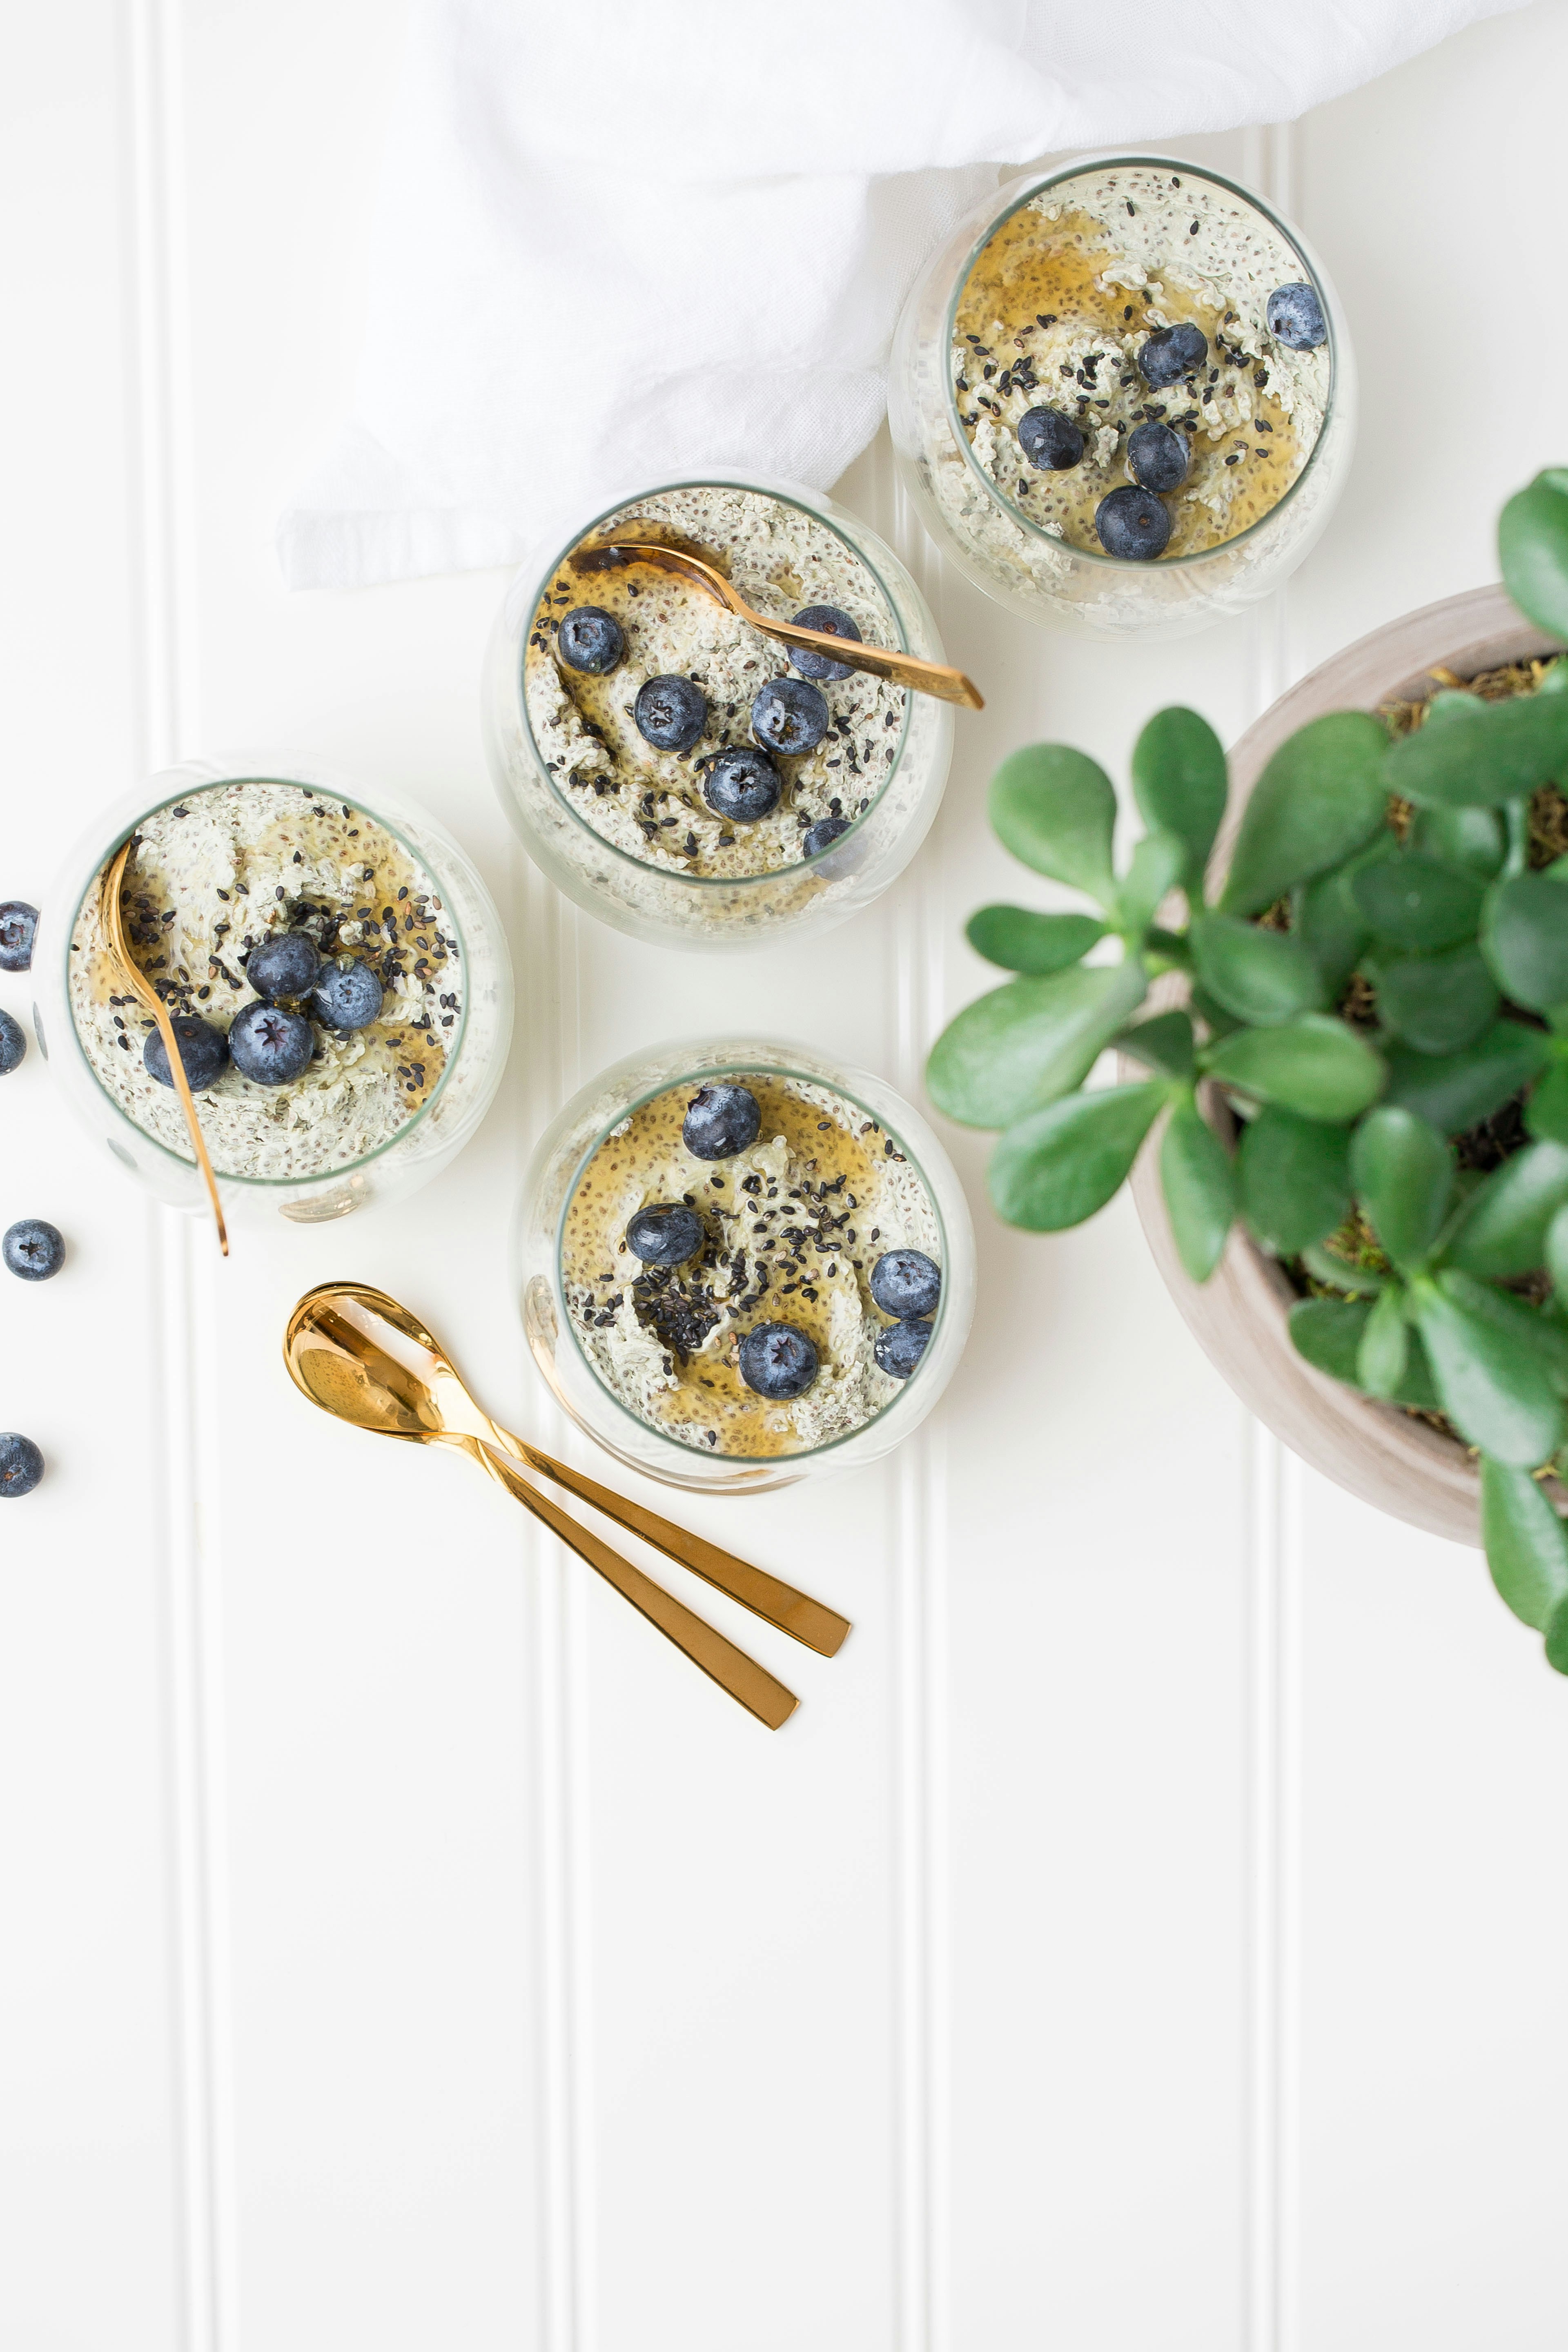 Save Time With Simple Keto Overnight Oats